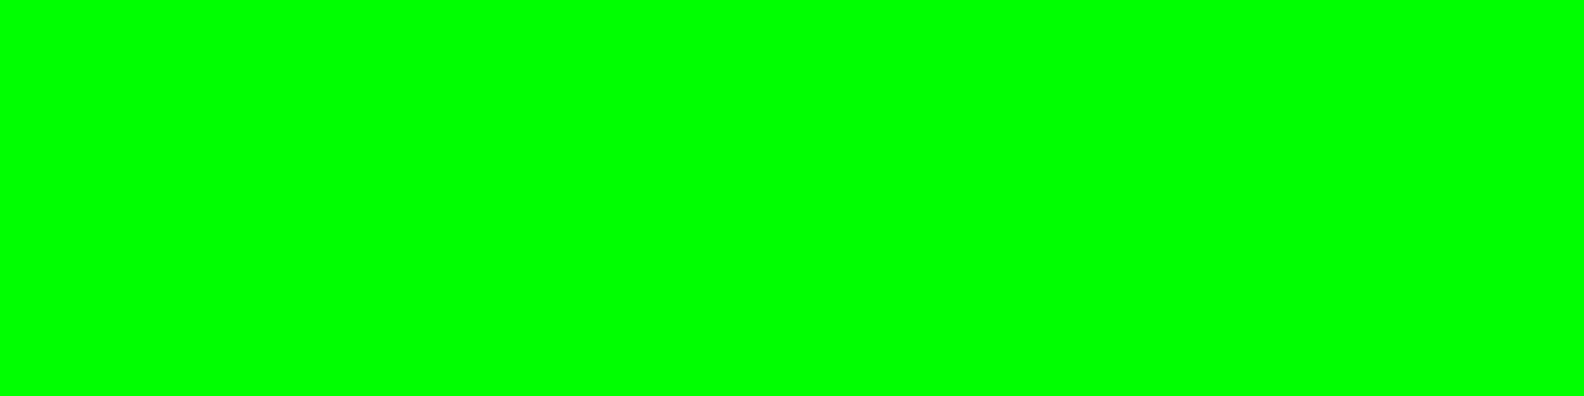 1584x396 Electric Green Solid Color Background